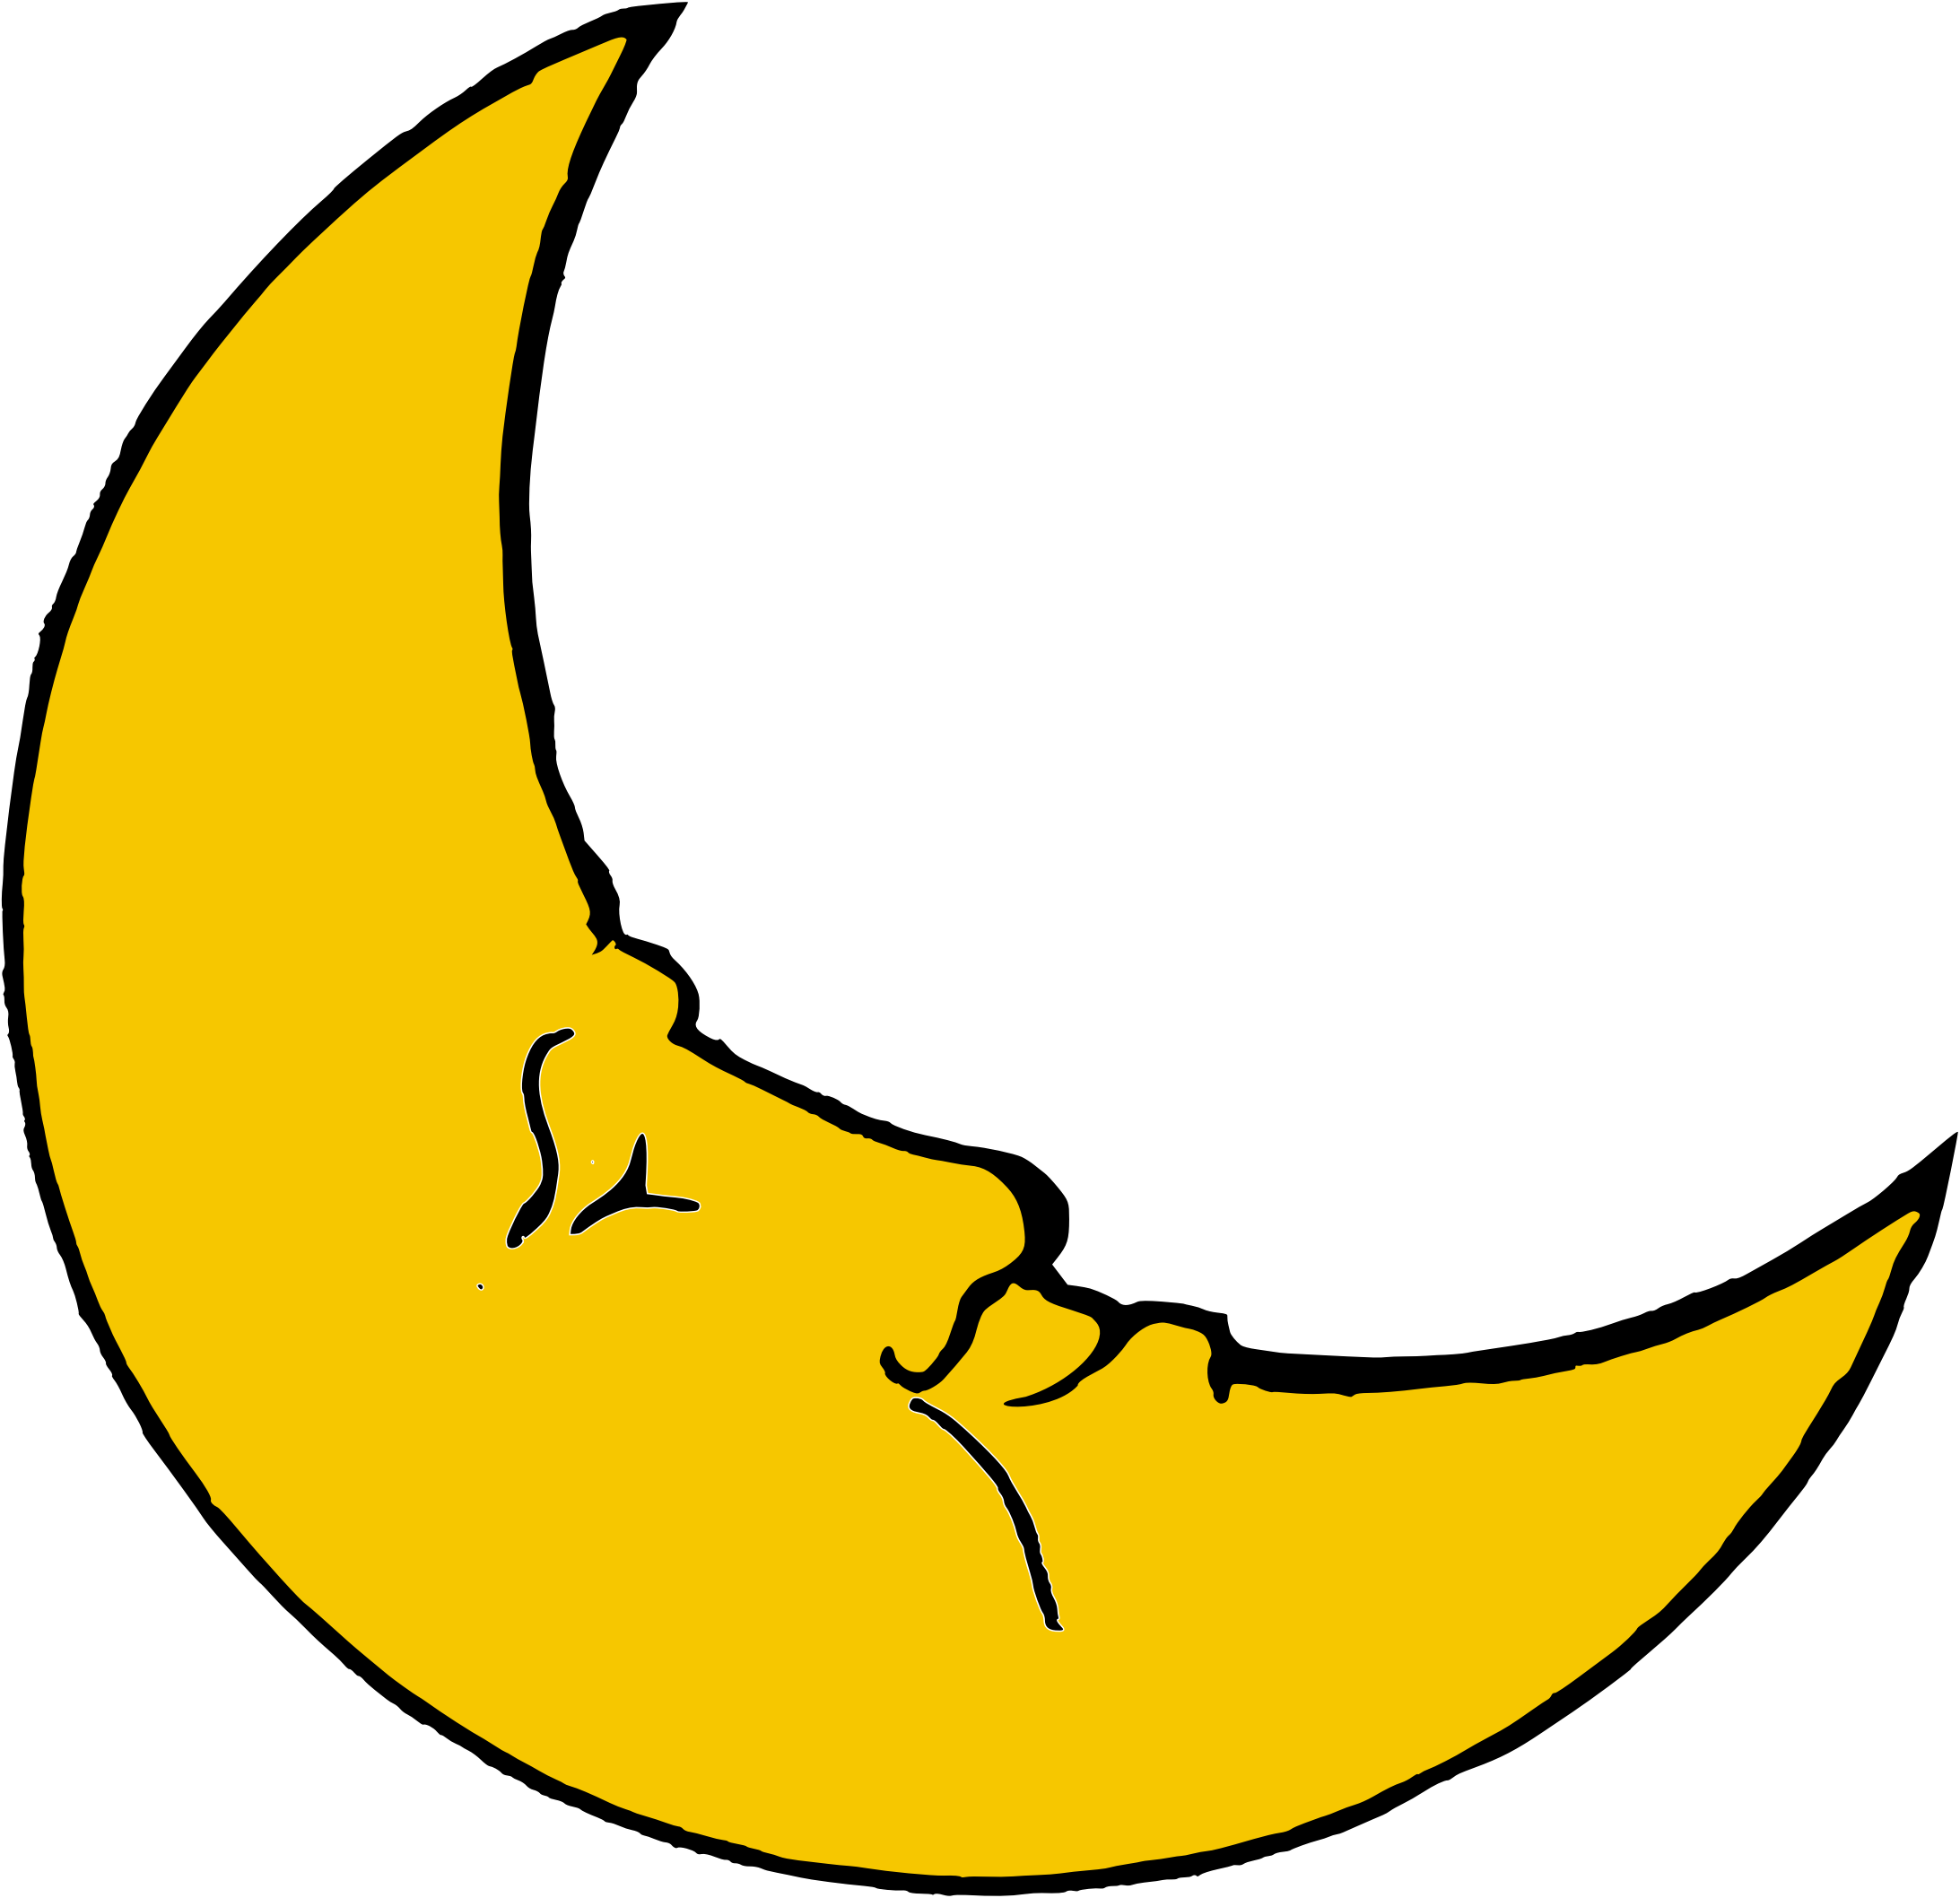 Reflection clipart moon. Crescent image group smiling